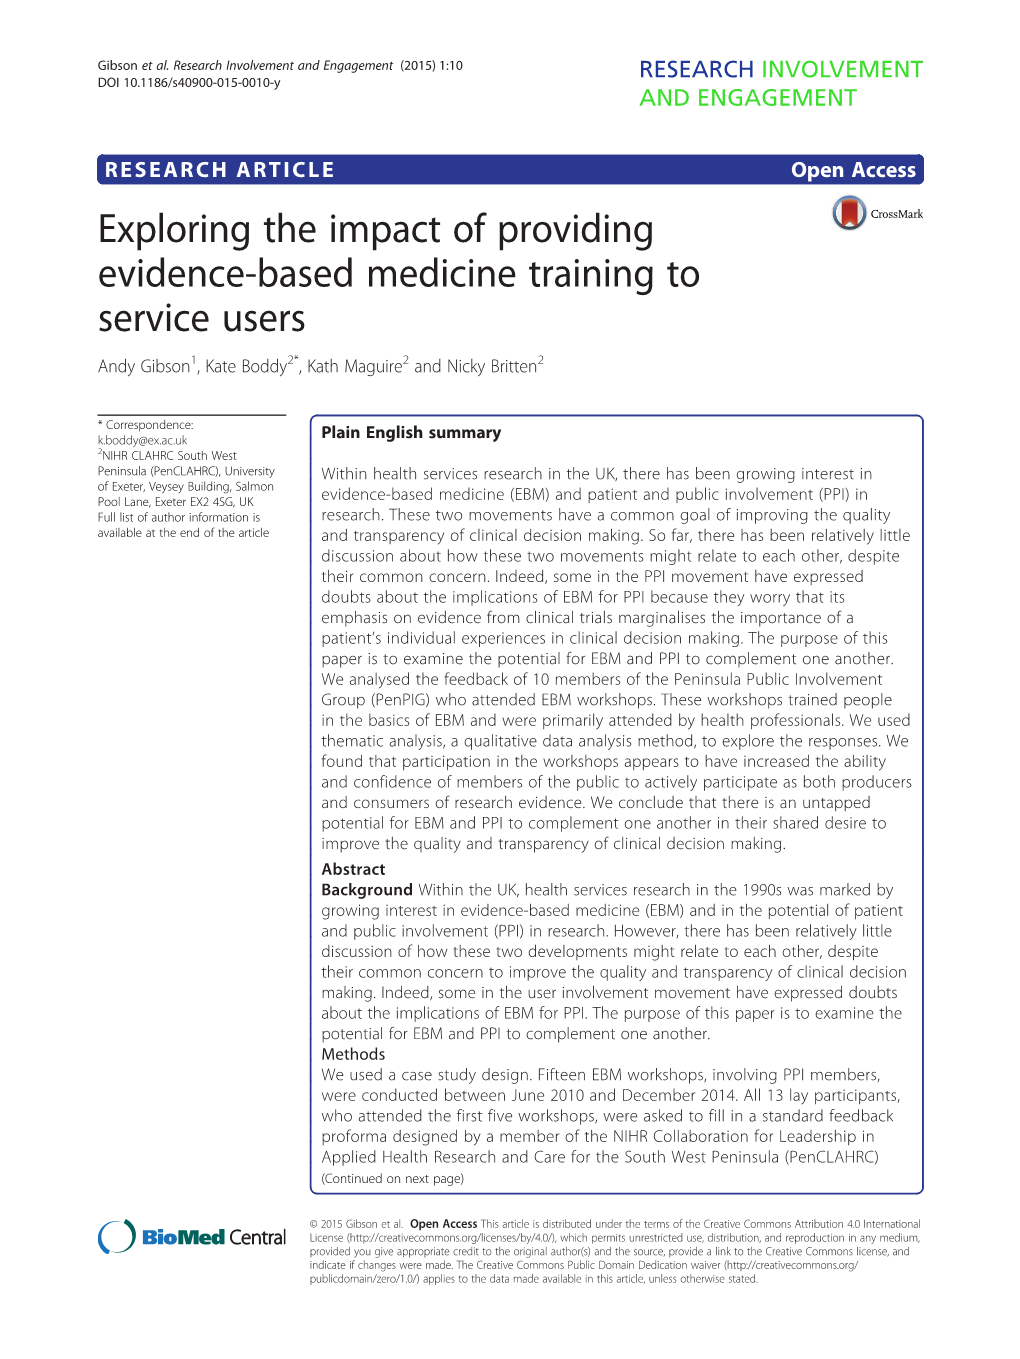 Exploring the Impact of Providing Evidence-Based Medicine Training to Service Users Andy Gibson1, Kate Boddy2*, Kath Maguire2 and Nicky Britten2